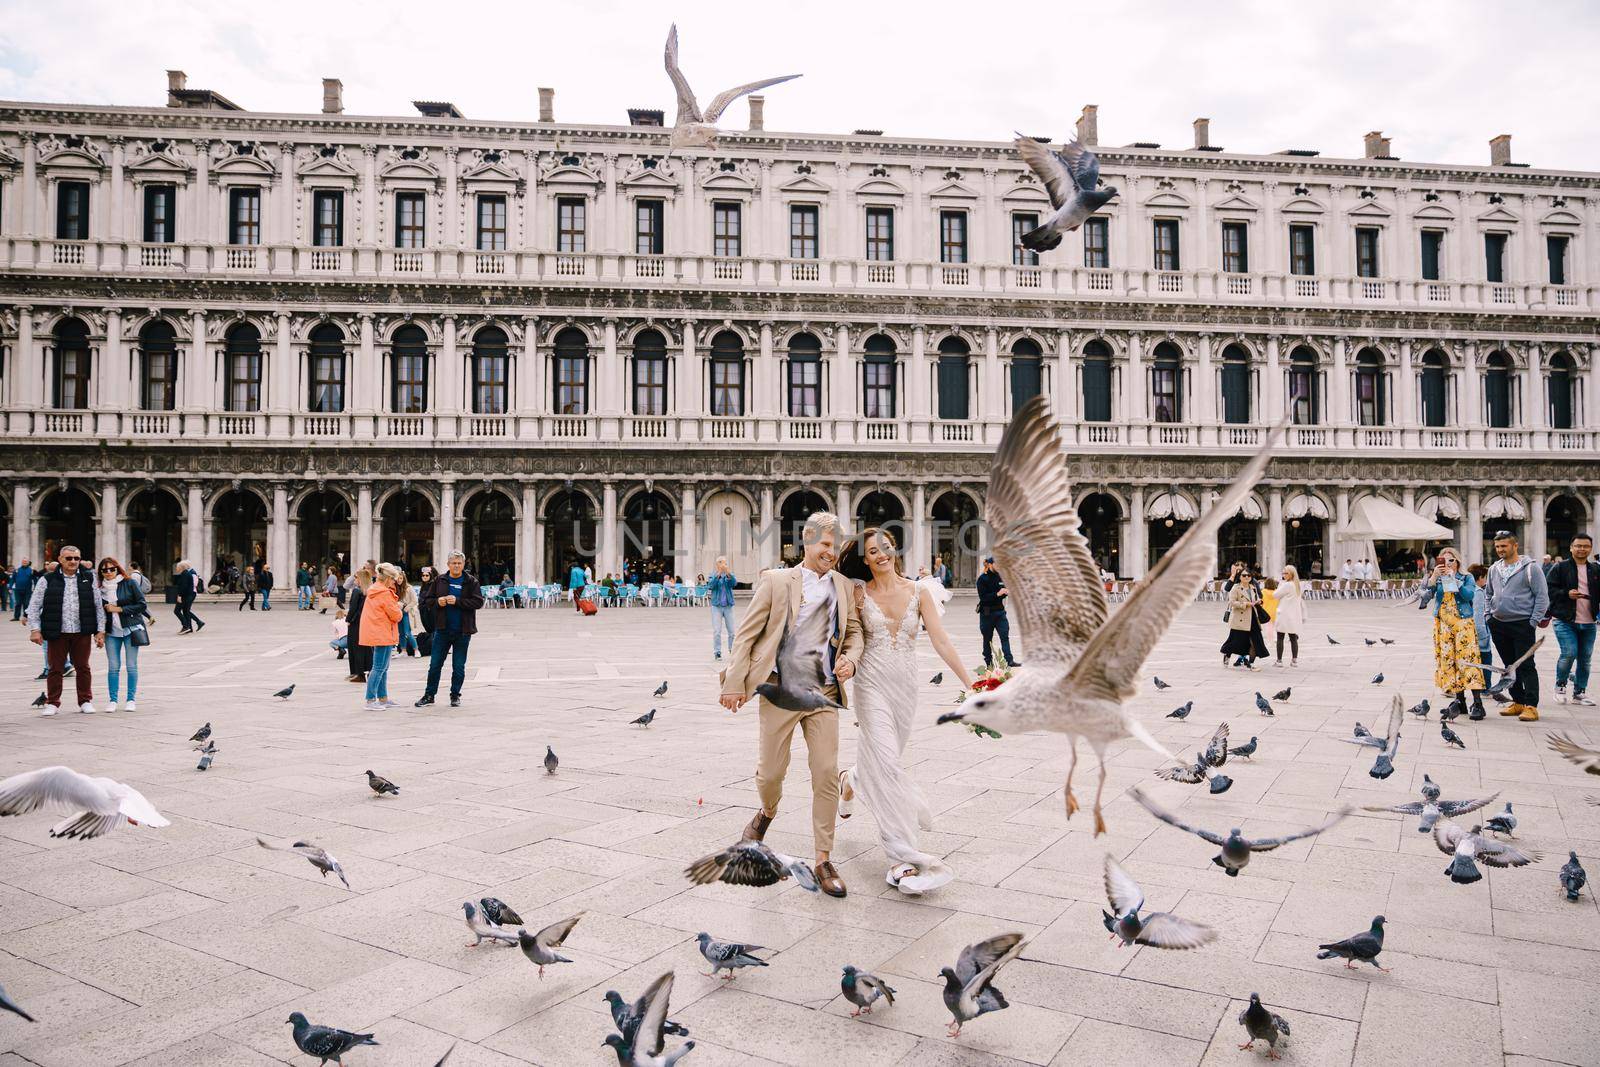 Venice, Italy - 04 october 2019: Venice Wedding, Italy. The bride and groom are running through a flock of flying pigeons in Piazza San Marco, amid the National Archaeological Museum Venice by Nadtochiy